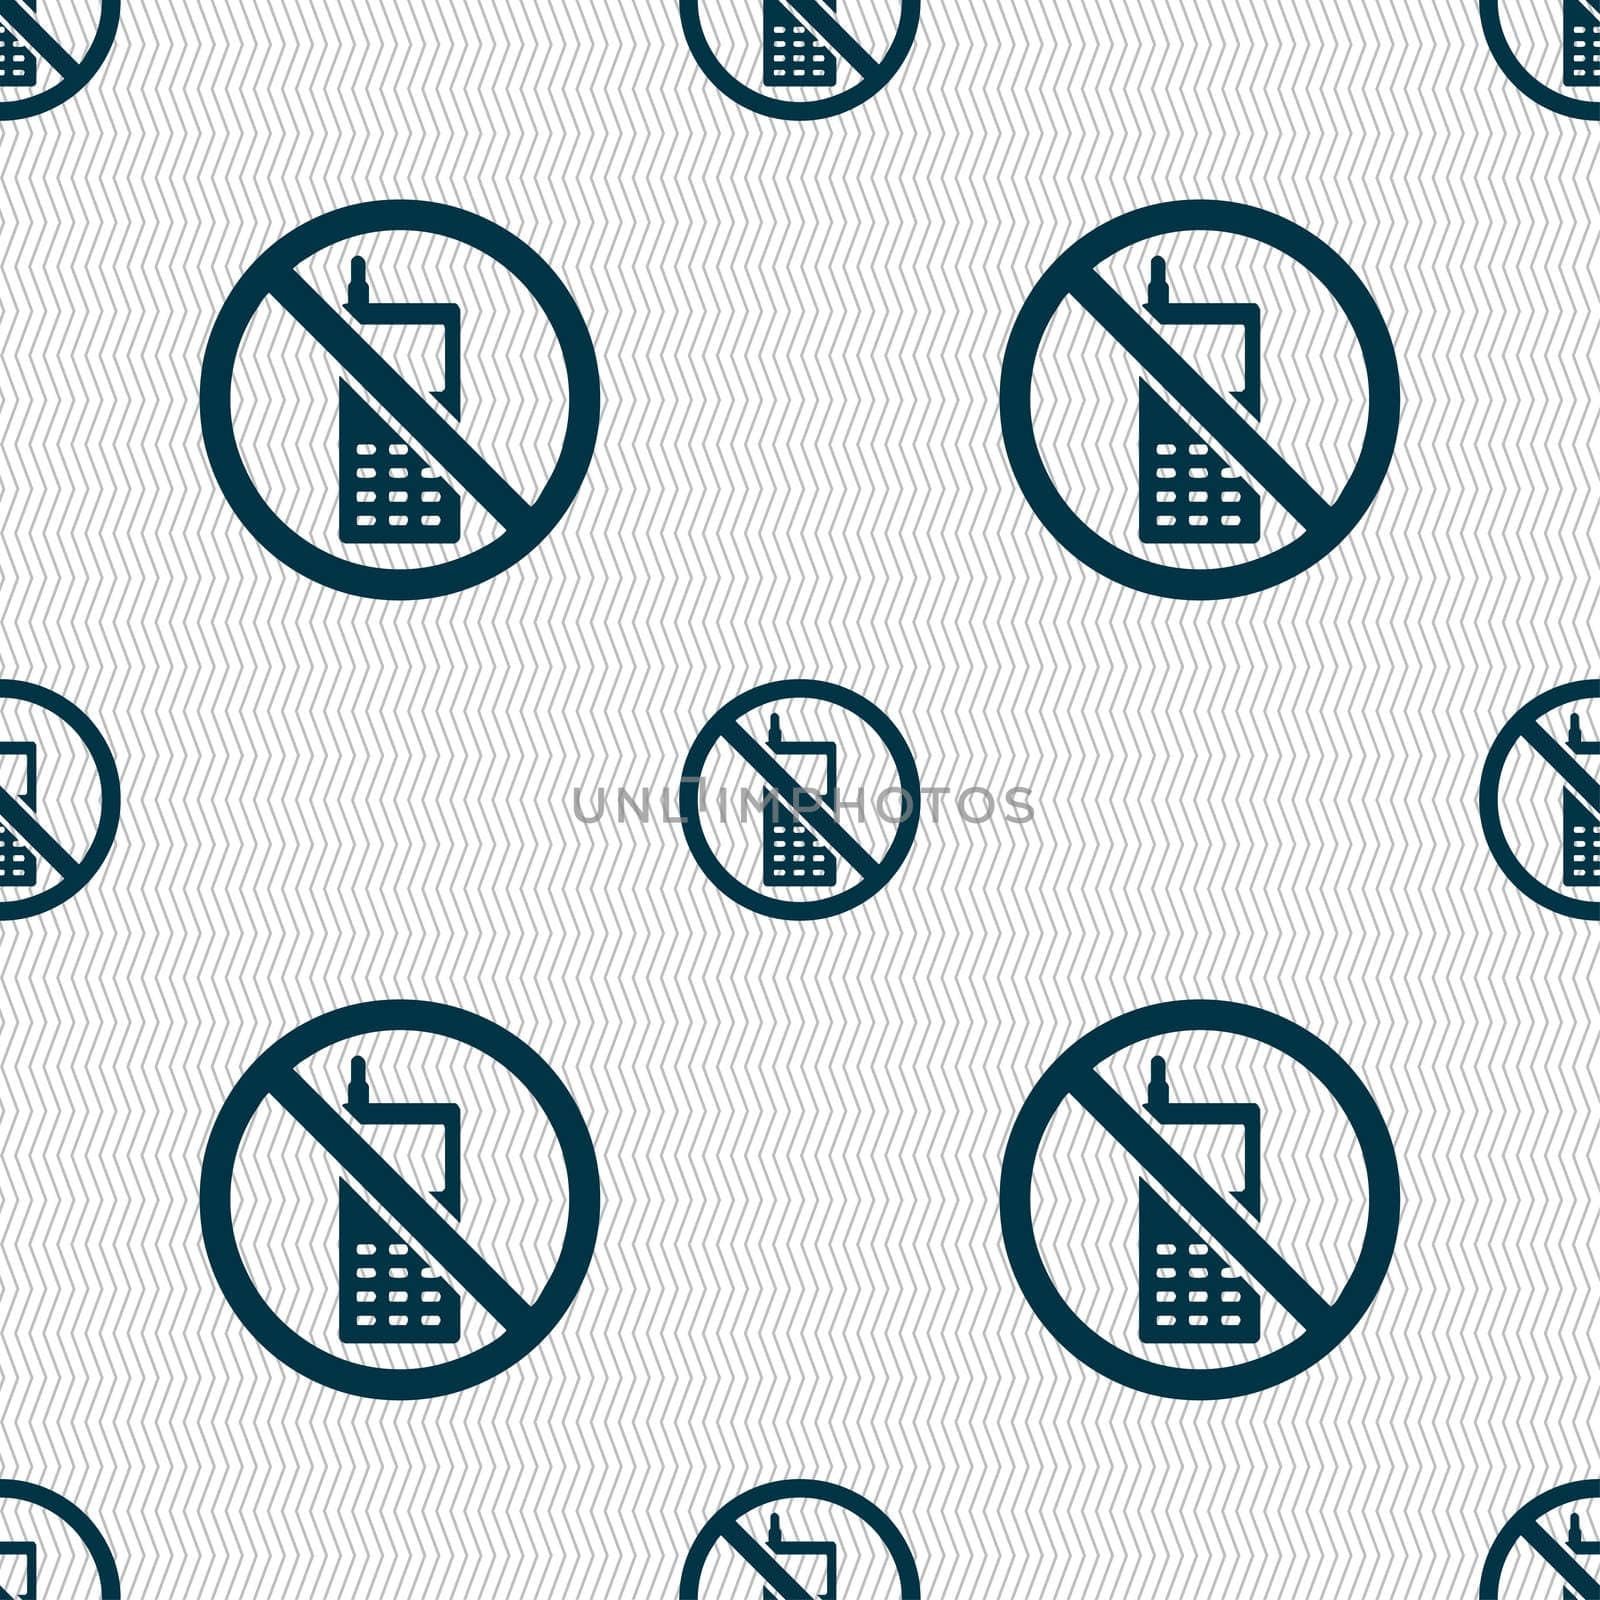 mobile phone is prohibited icon sign. Seamless pattern with geometric texture. illustration